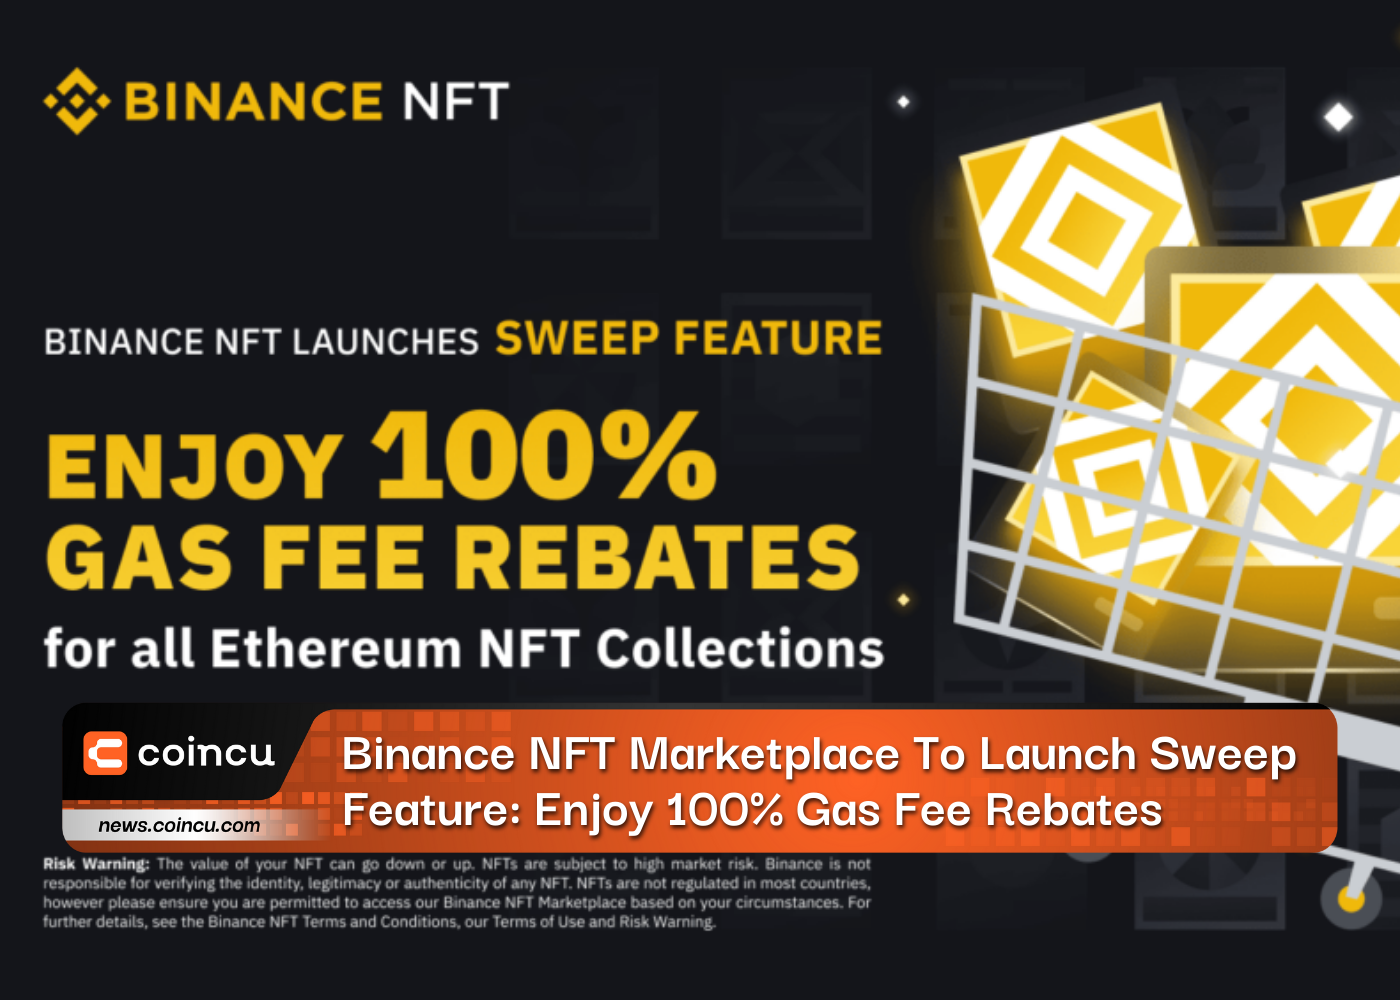 Binance NFT Marketplace To Launch Sweep Feature: Enjoy 100% Gas Fee Rebates